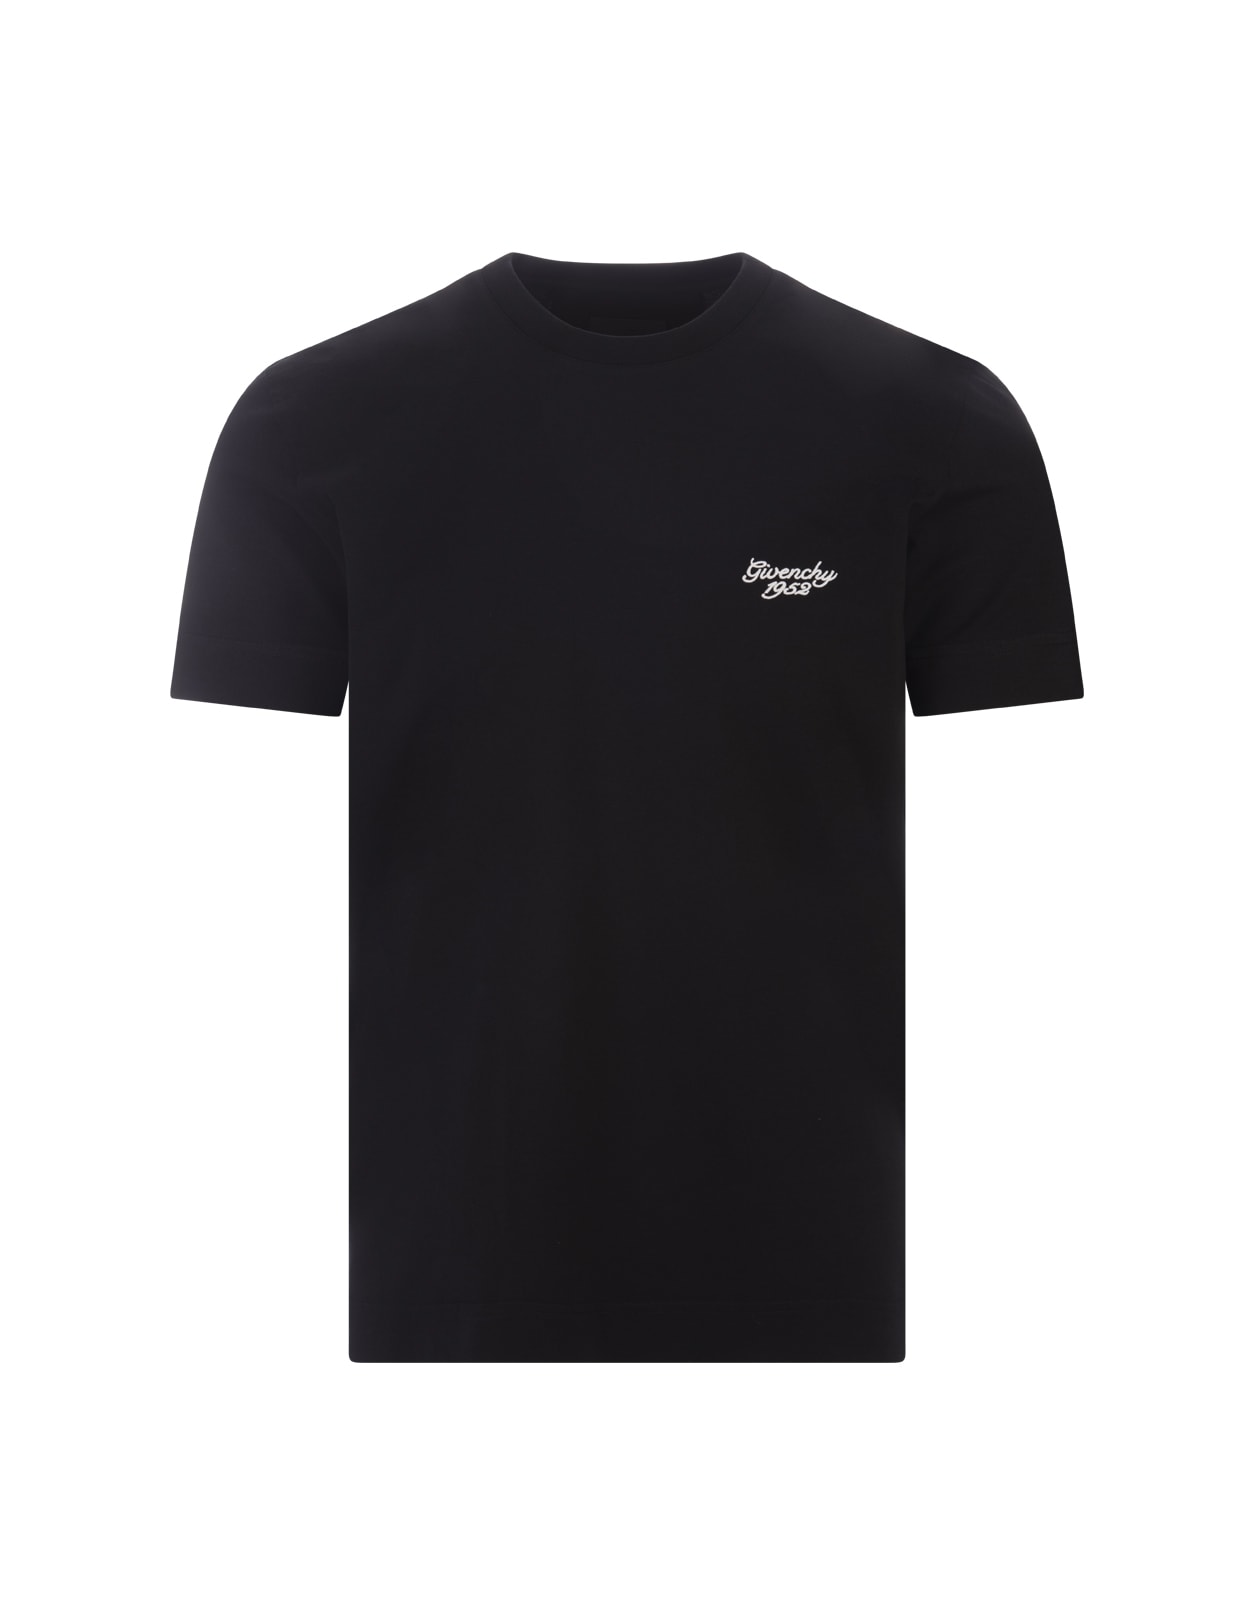 Givenchy 1952 Slim T-shirt In Black Cotton